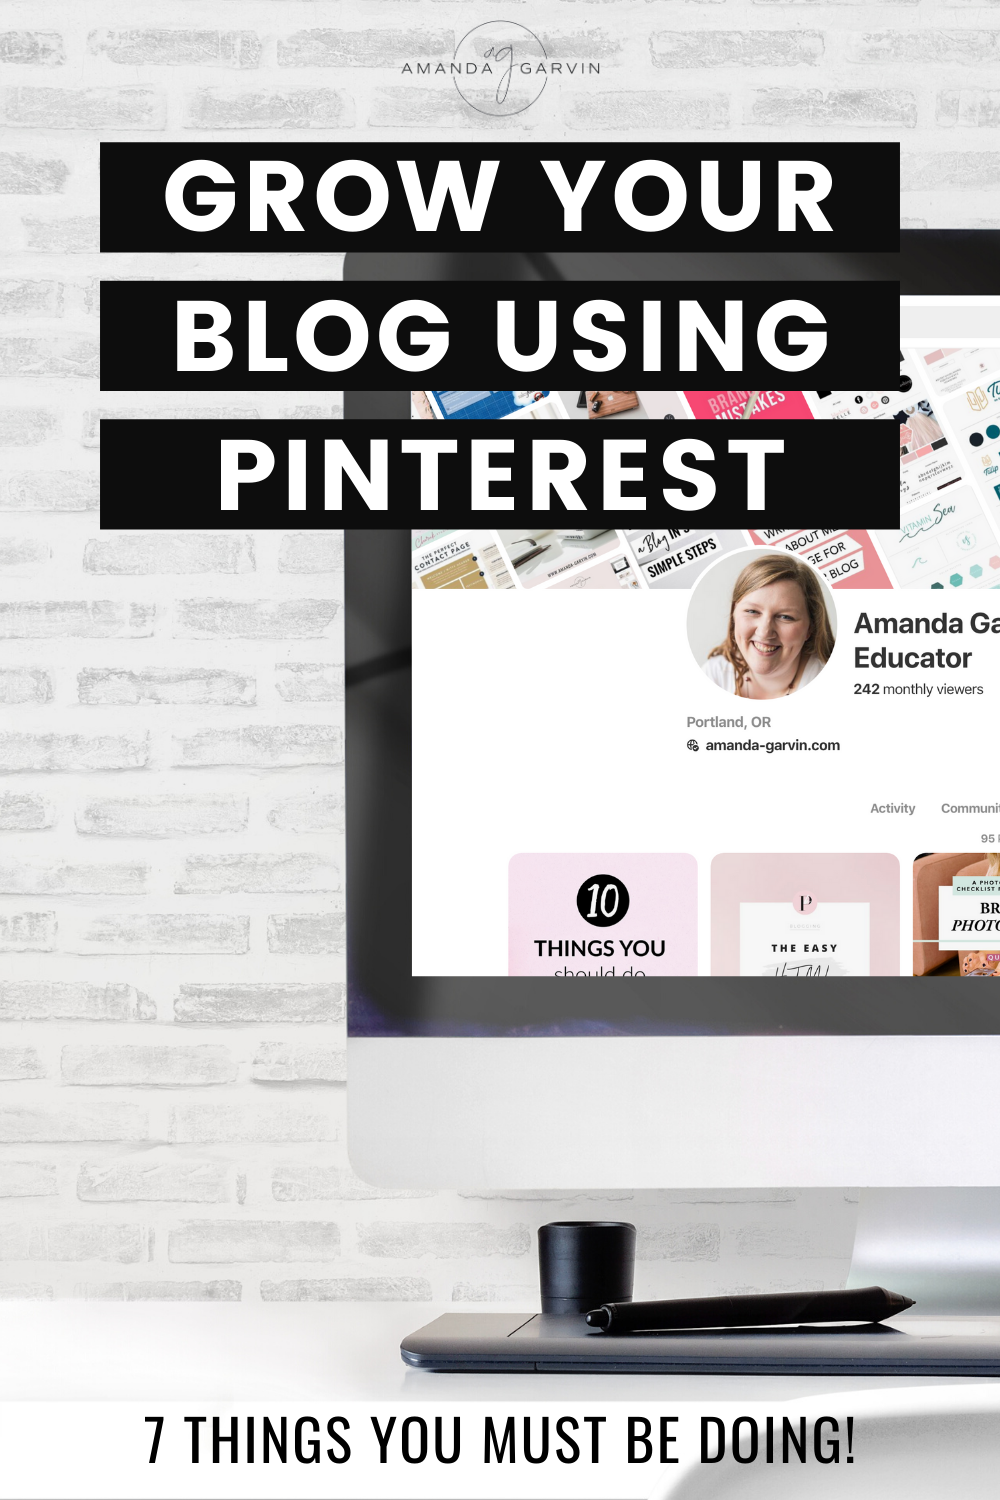 Pinterest is a crazy powerful tool every person with an online presence should be using to drive traffic to their site, increase sales, and reach more people. Check out this article on 7 tips to grow your blog using Pinterest.